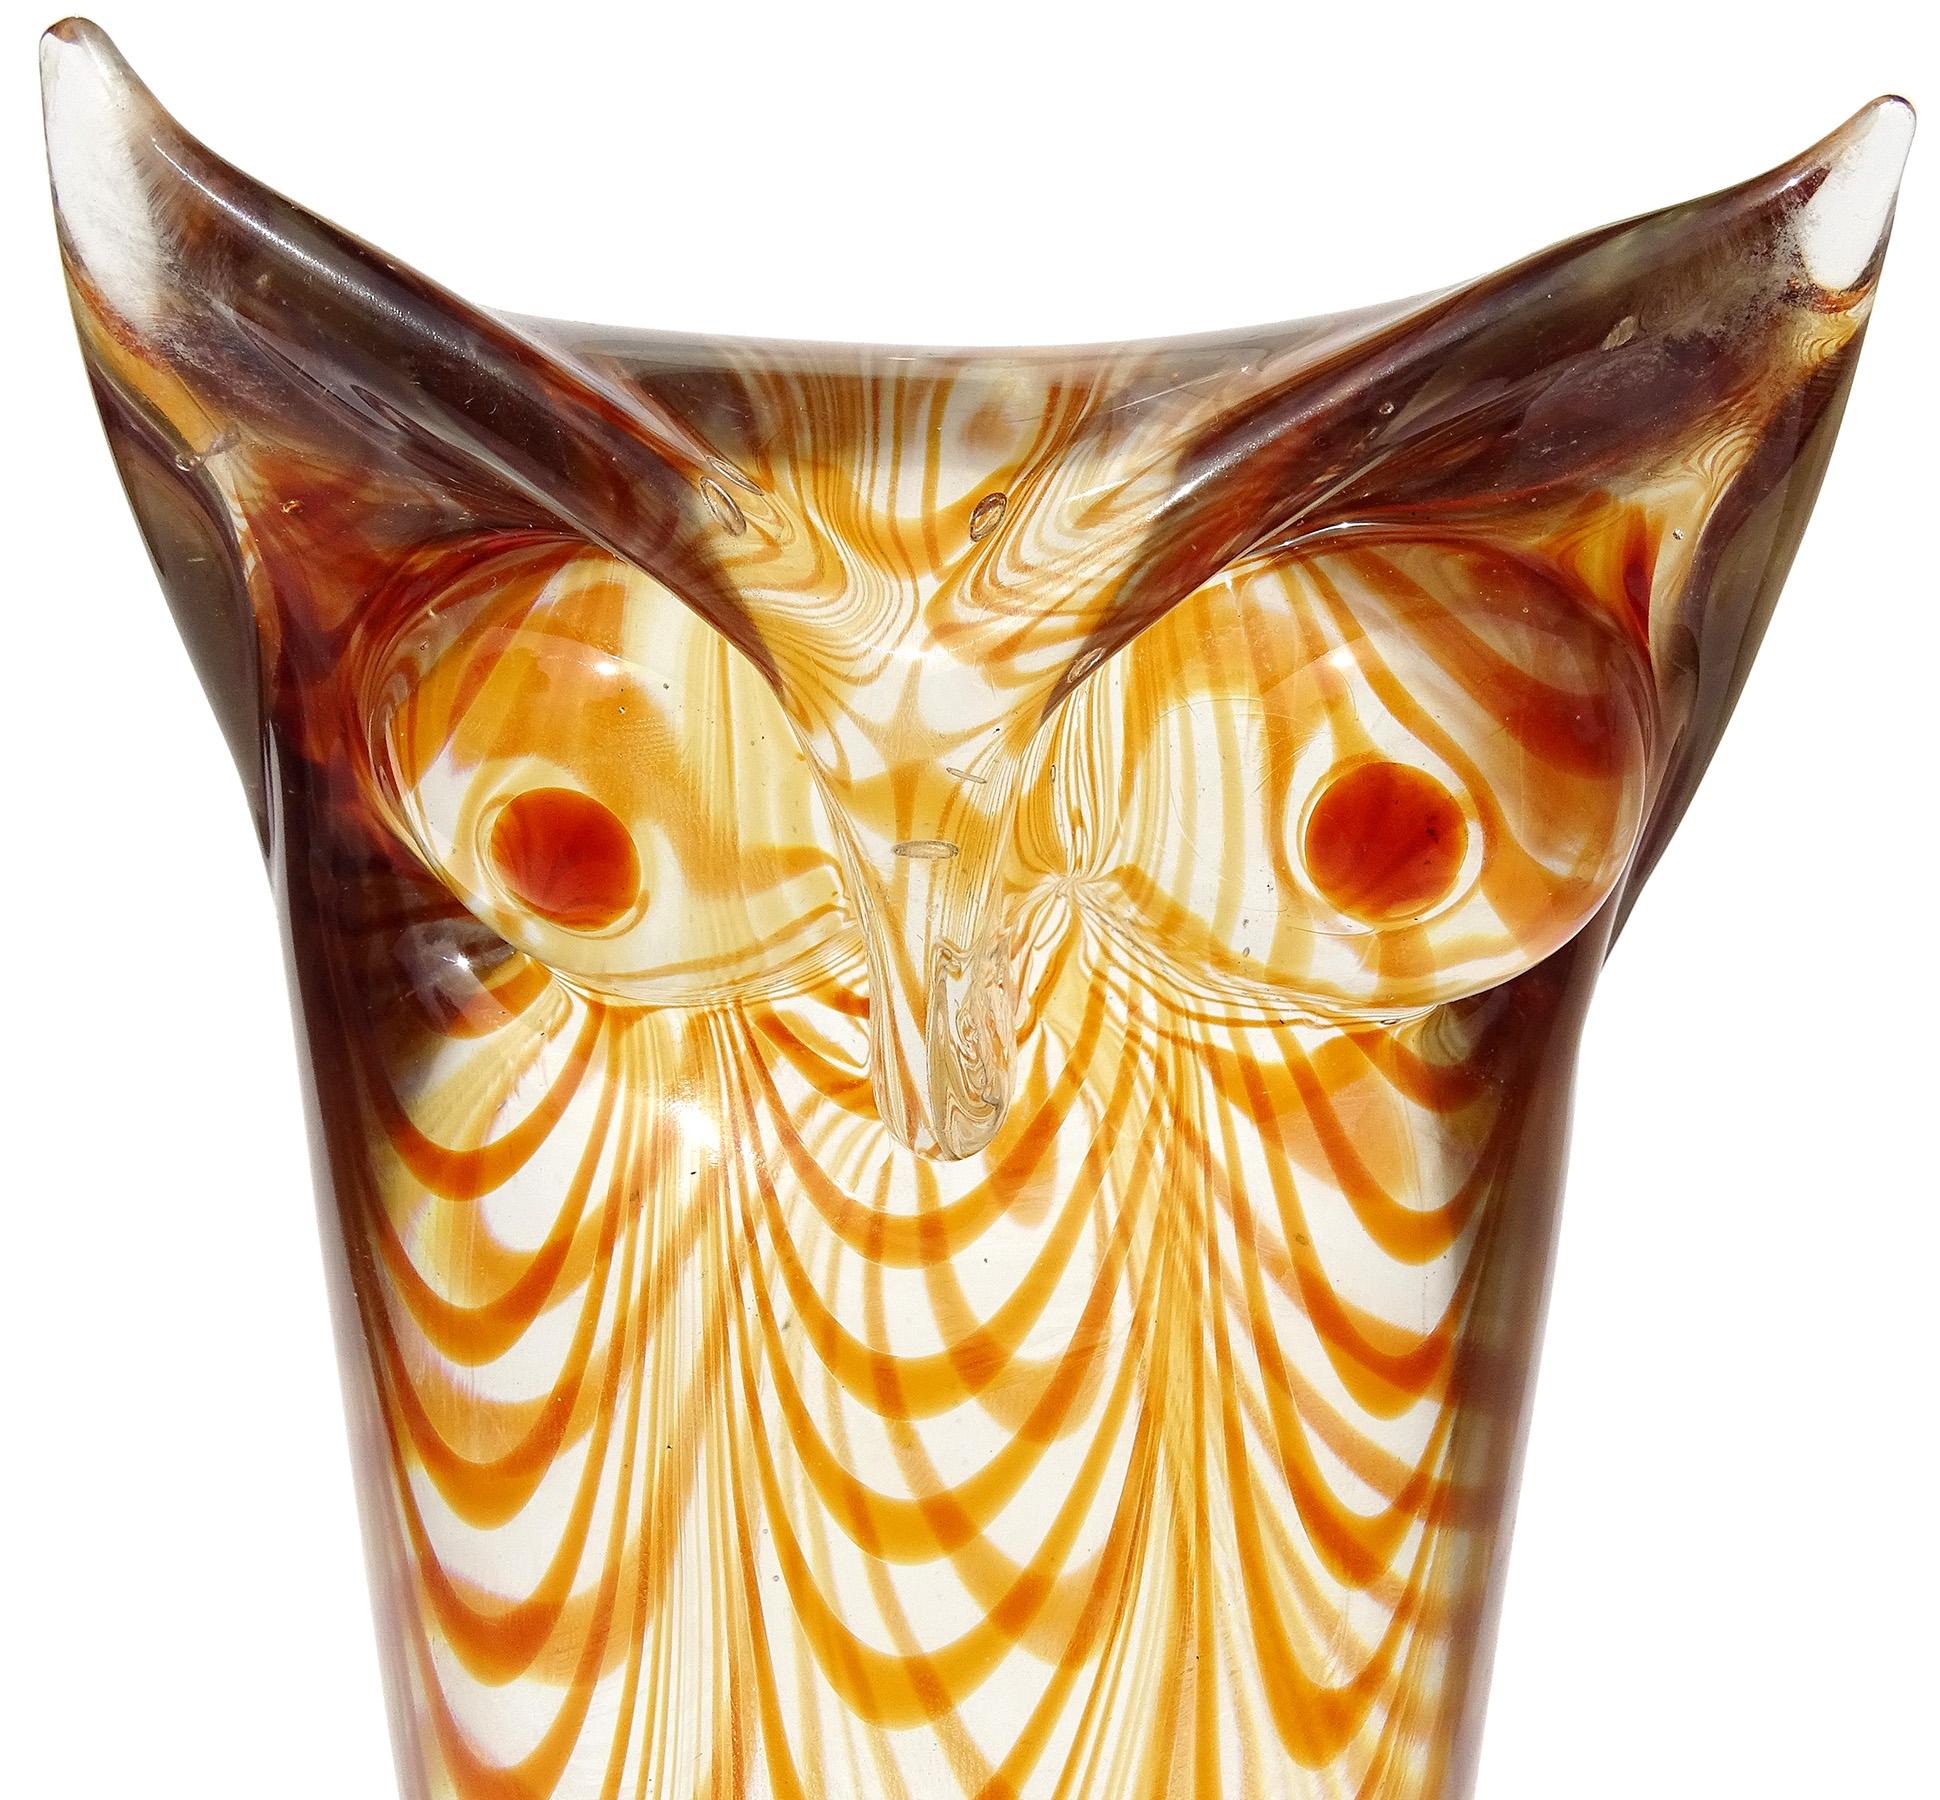 Hand-Crafted Cenedese Tosi 1979 Murano Sommerso Orange Italian Art Glass Owl Figure Sculpture